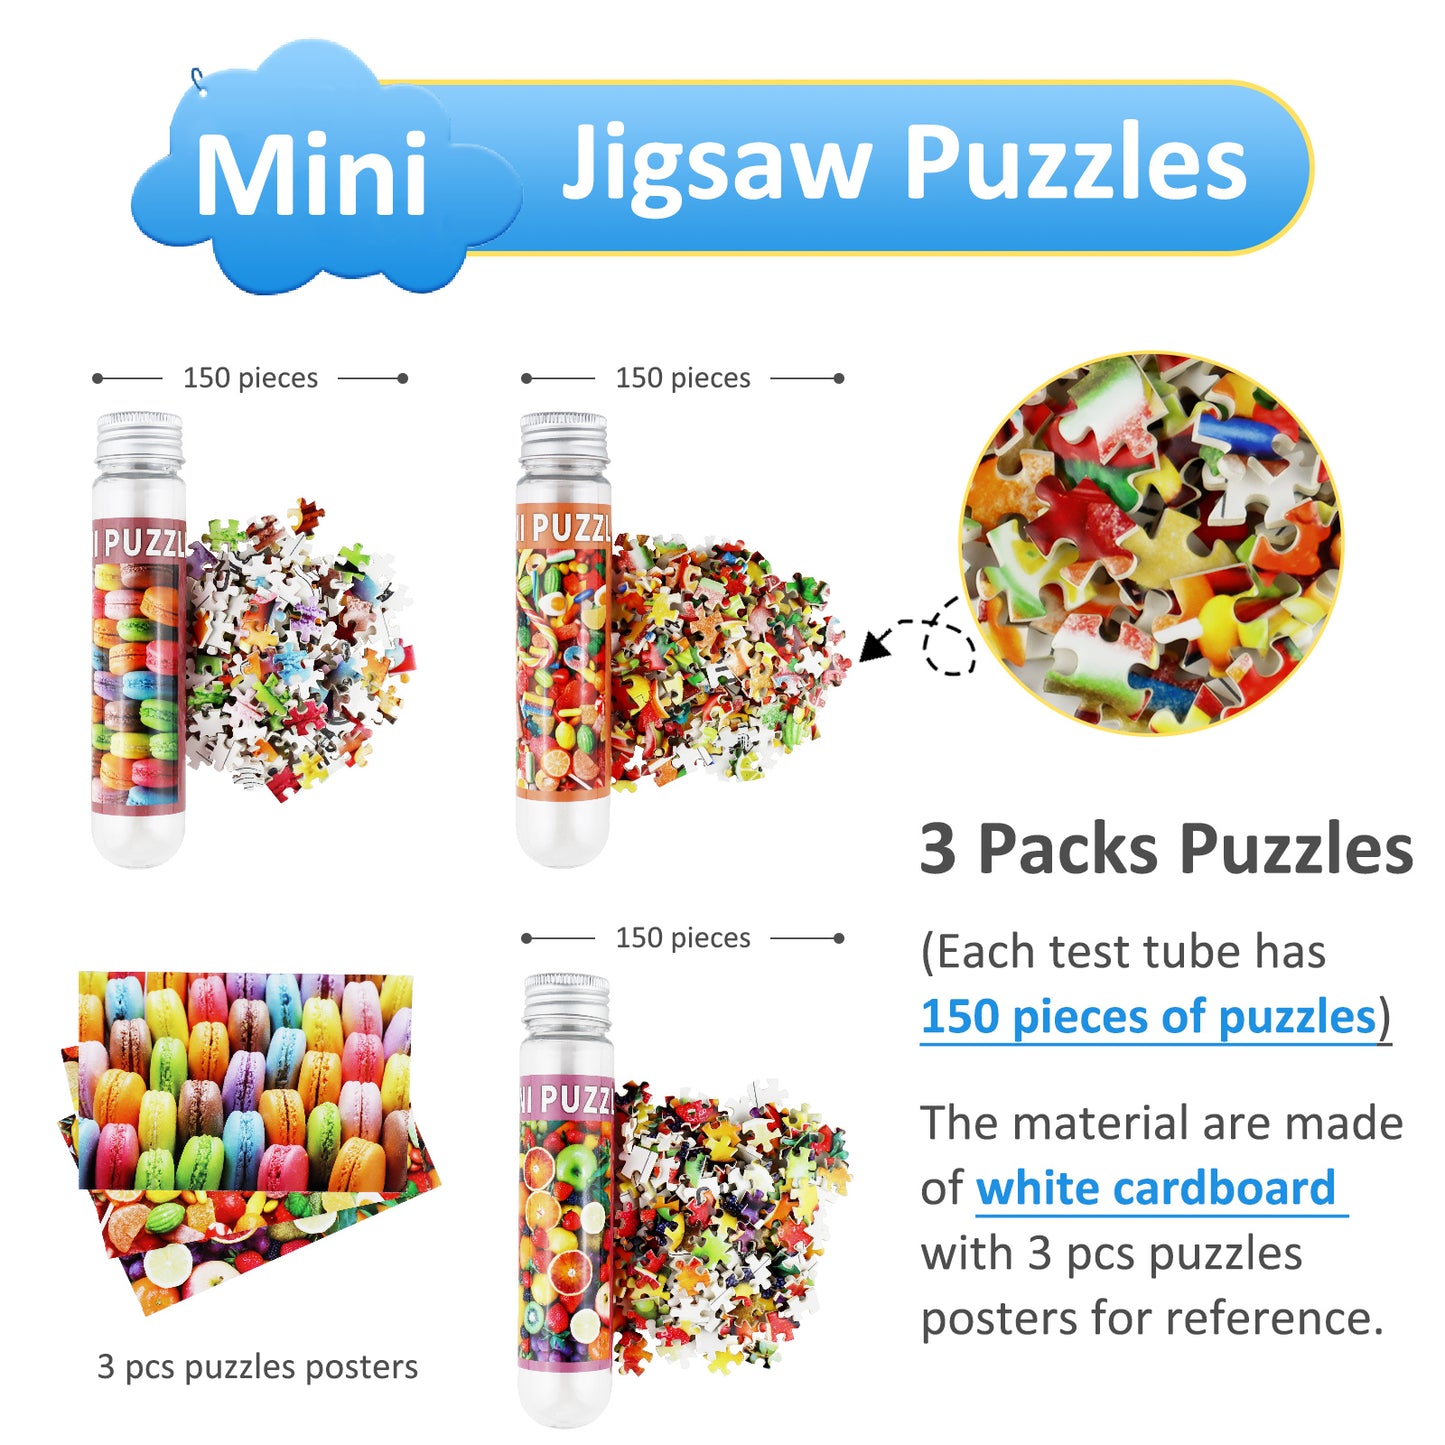 Small Jigsaw Puzzles Mini Size Colorful Candy Fruits Macaron 150 Pieces Puzzles for Adult(Pack of 3)